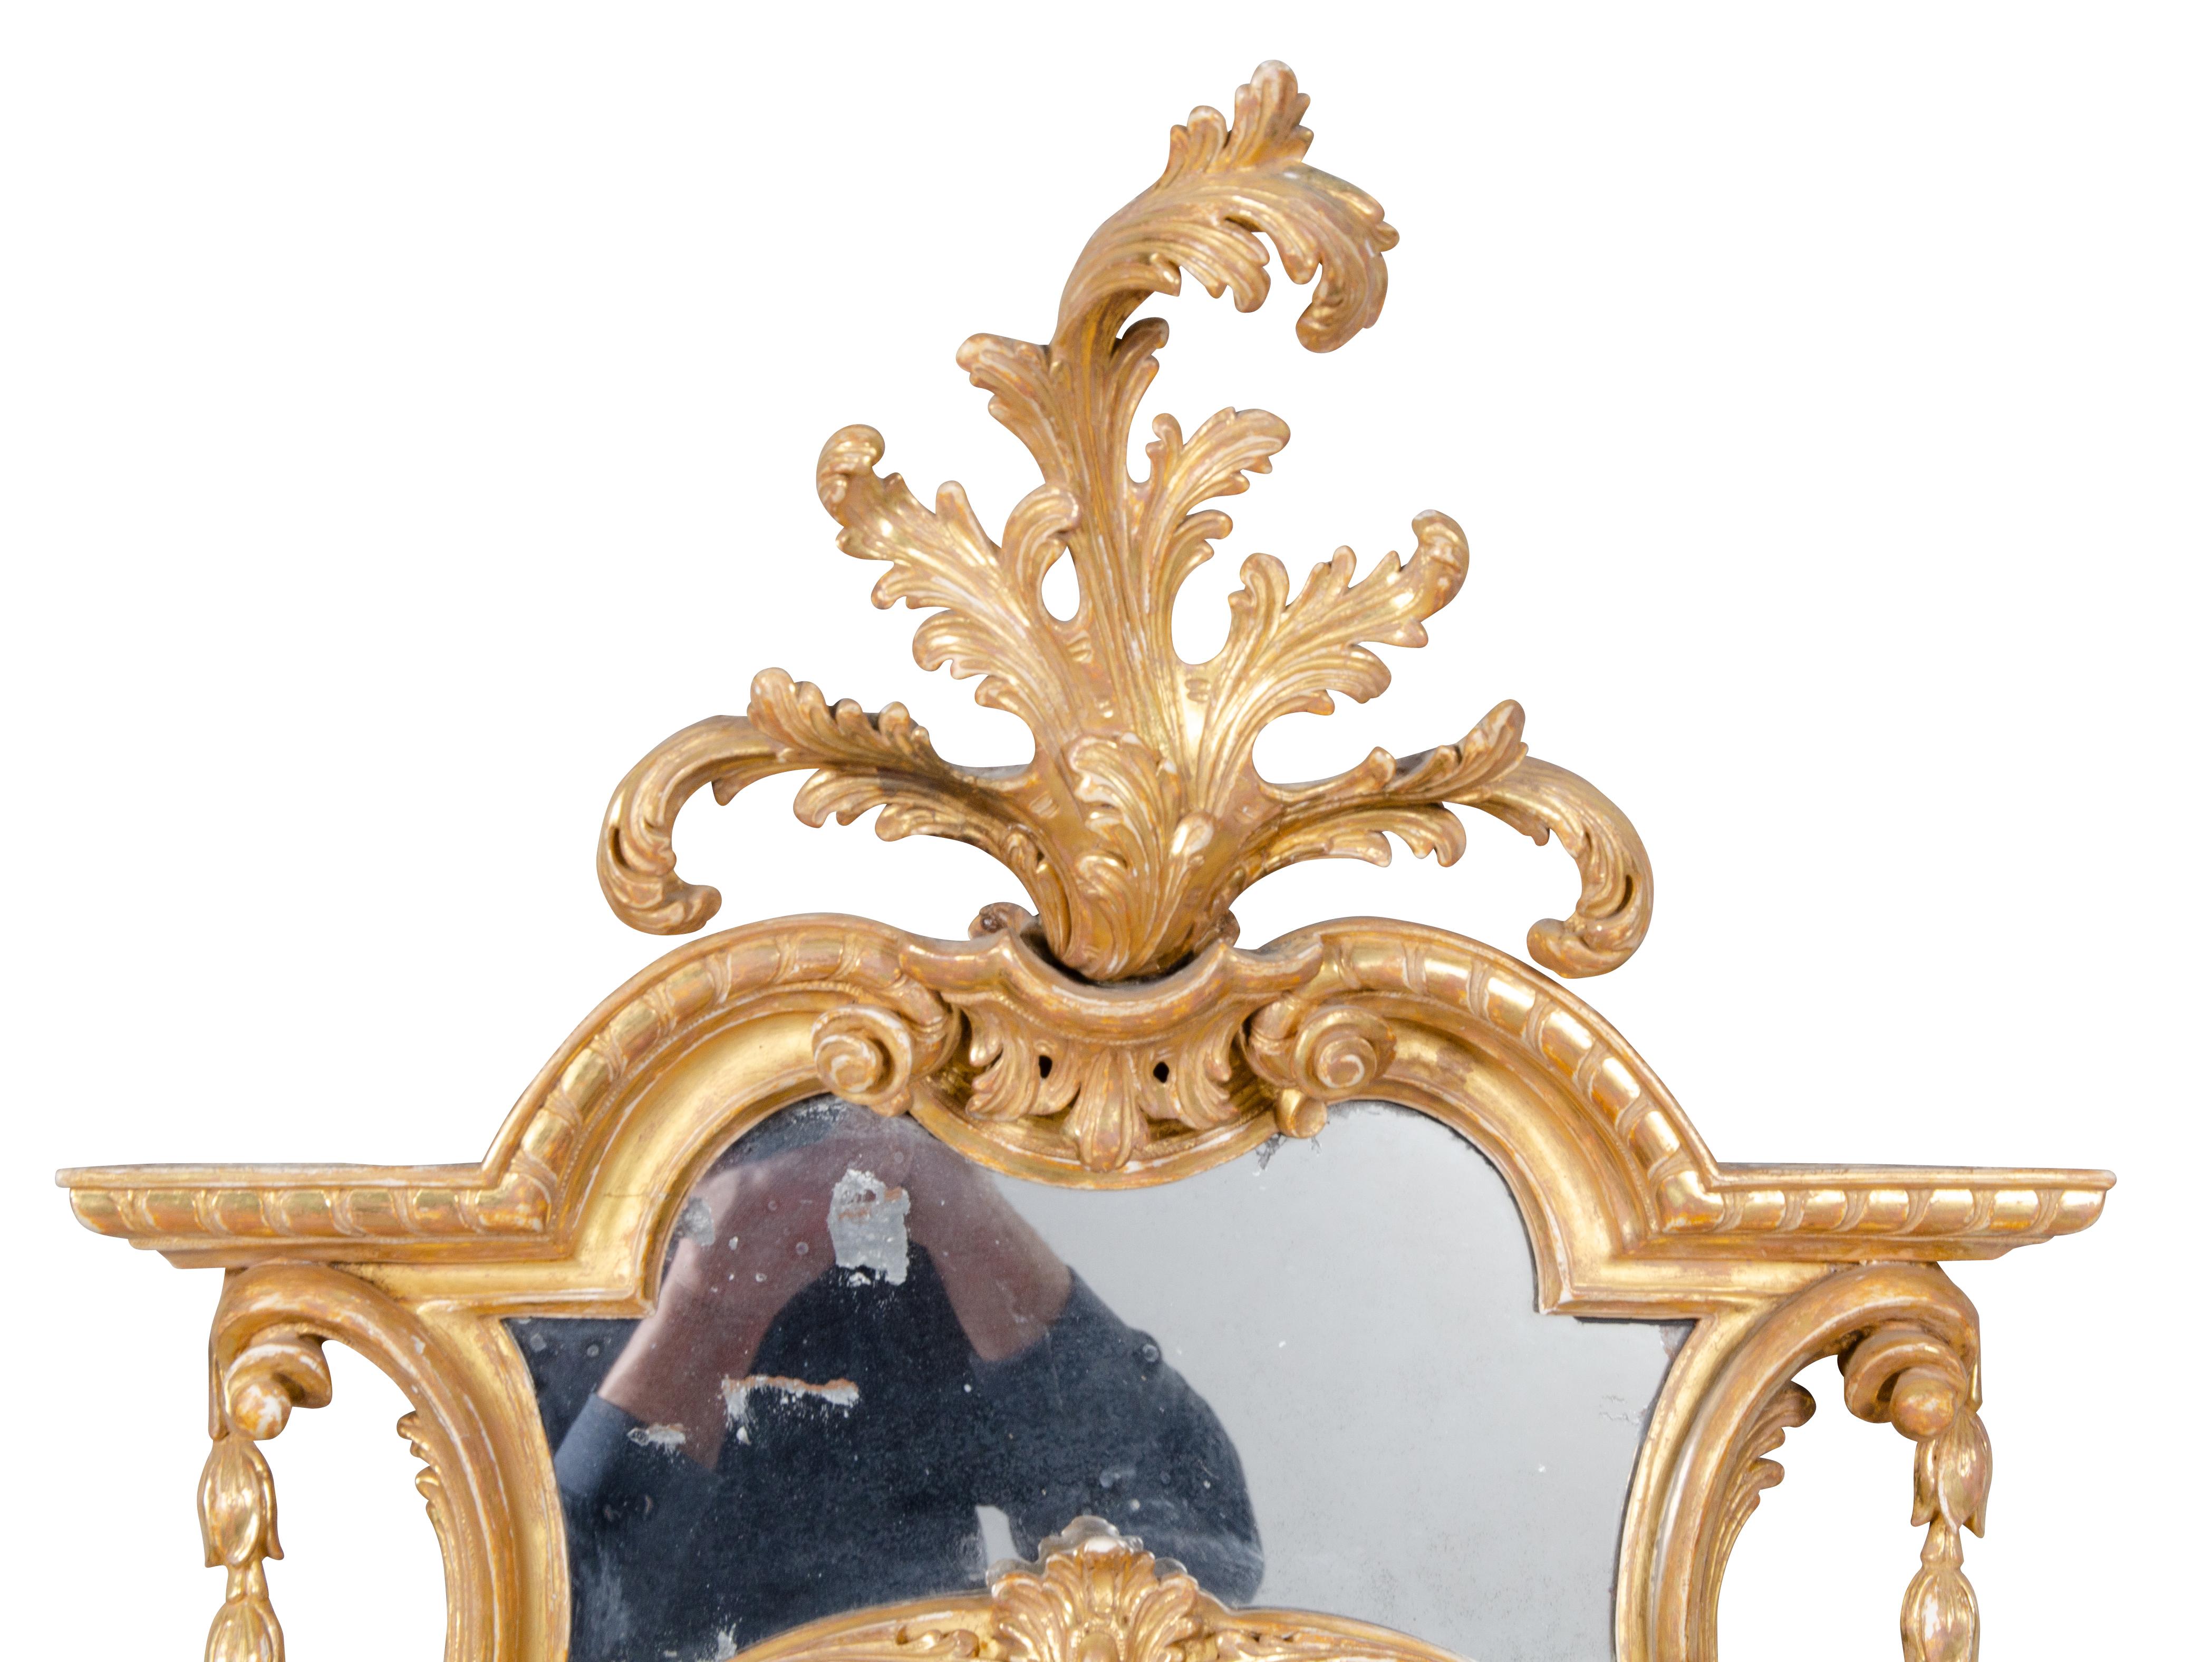 These exquisite mirrors sold at Christie's twenty years ago. With great surface and the best quality gilding. The crest with leaf spray over an arched top and glass panel over an oval plate. Four mounted metal candle arms. The whole within a carved